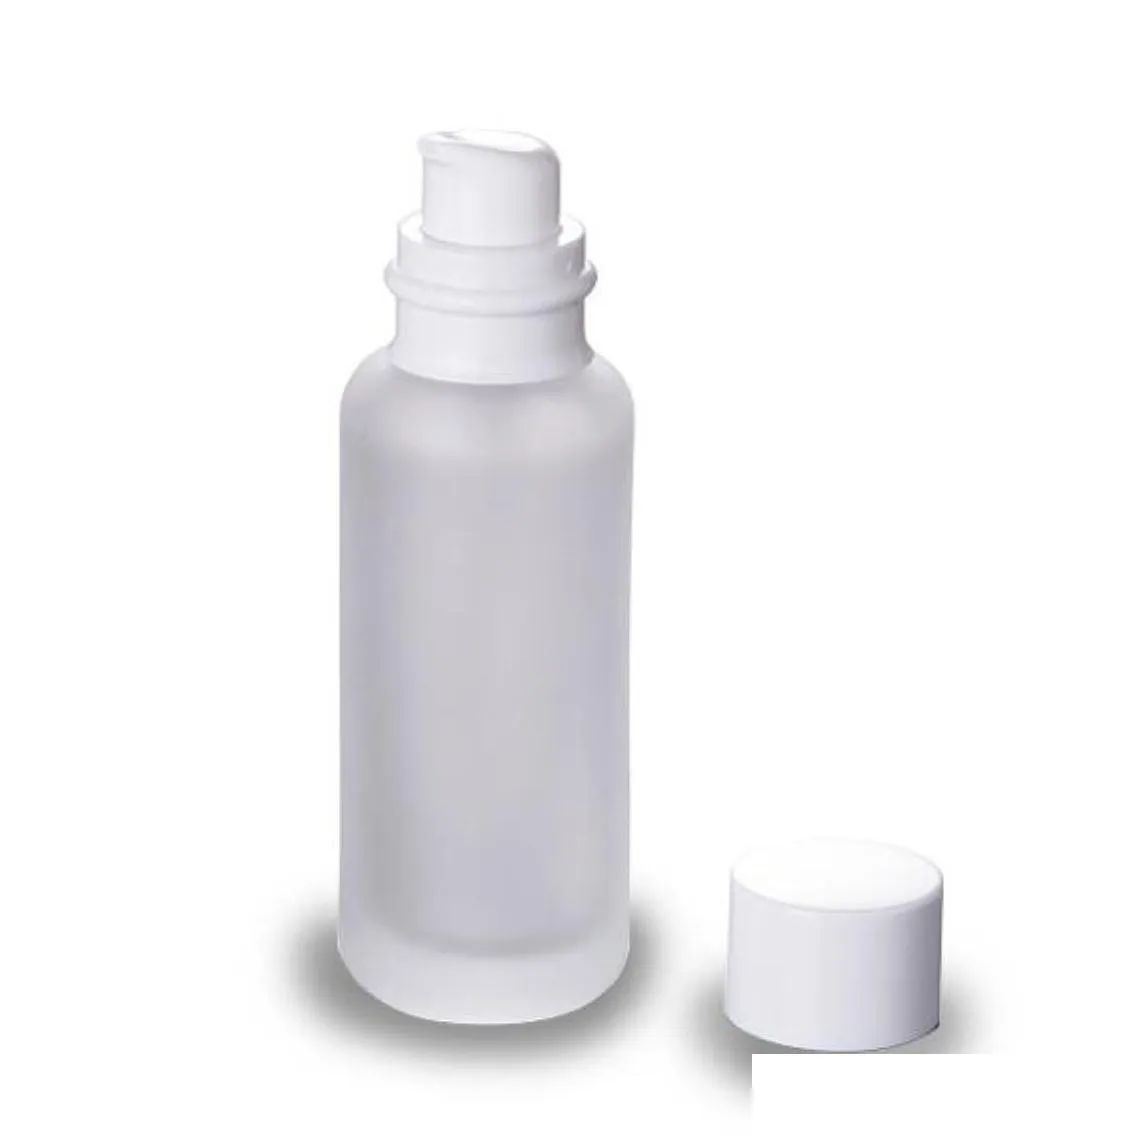 wholesale packaging bottles frosted glass jar lotion cream bottles round cosmetic jars hand face pump bottle with wood grain cap sn4022 drop delivery 2021